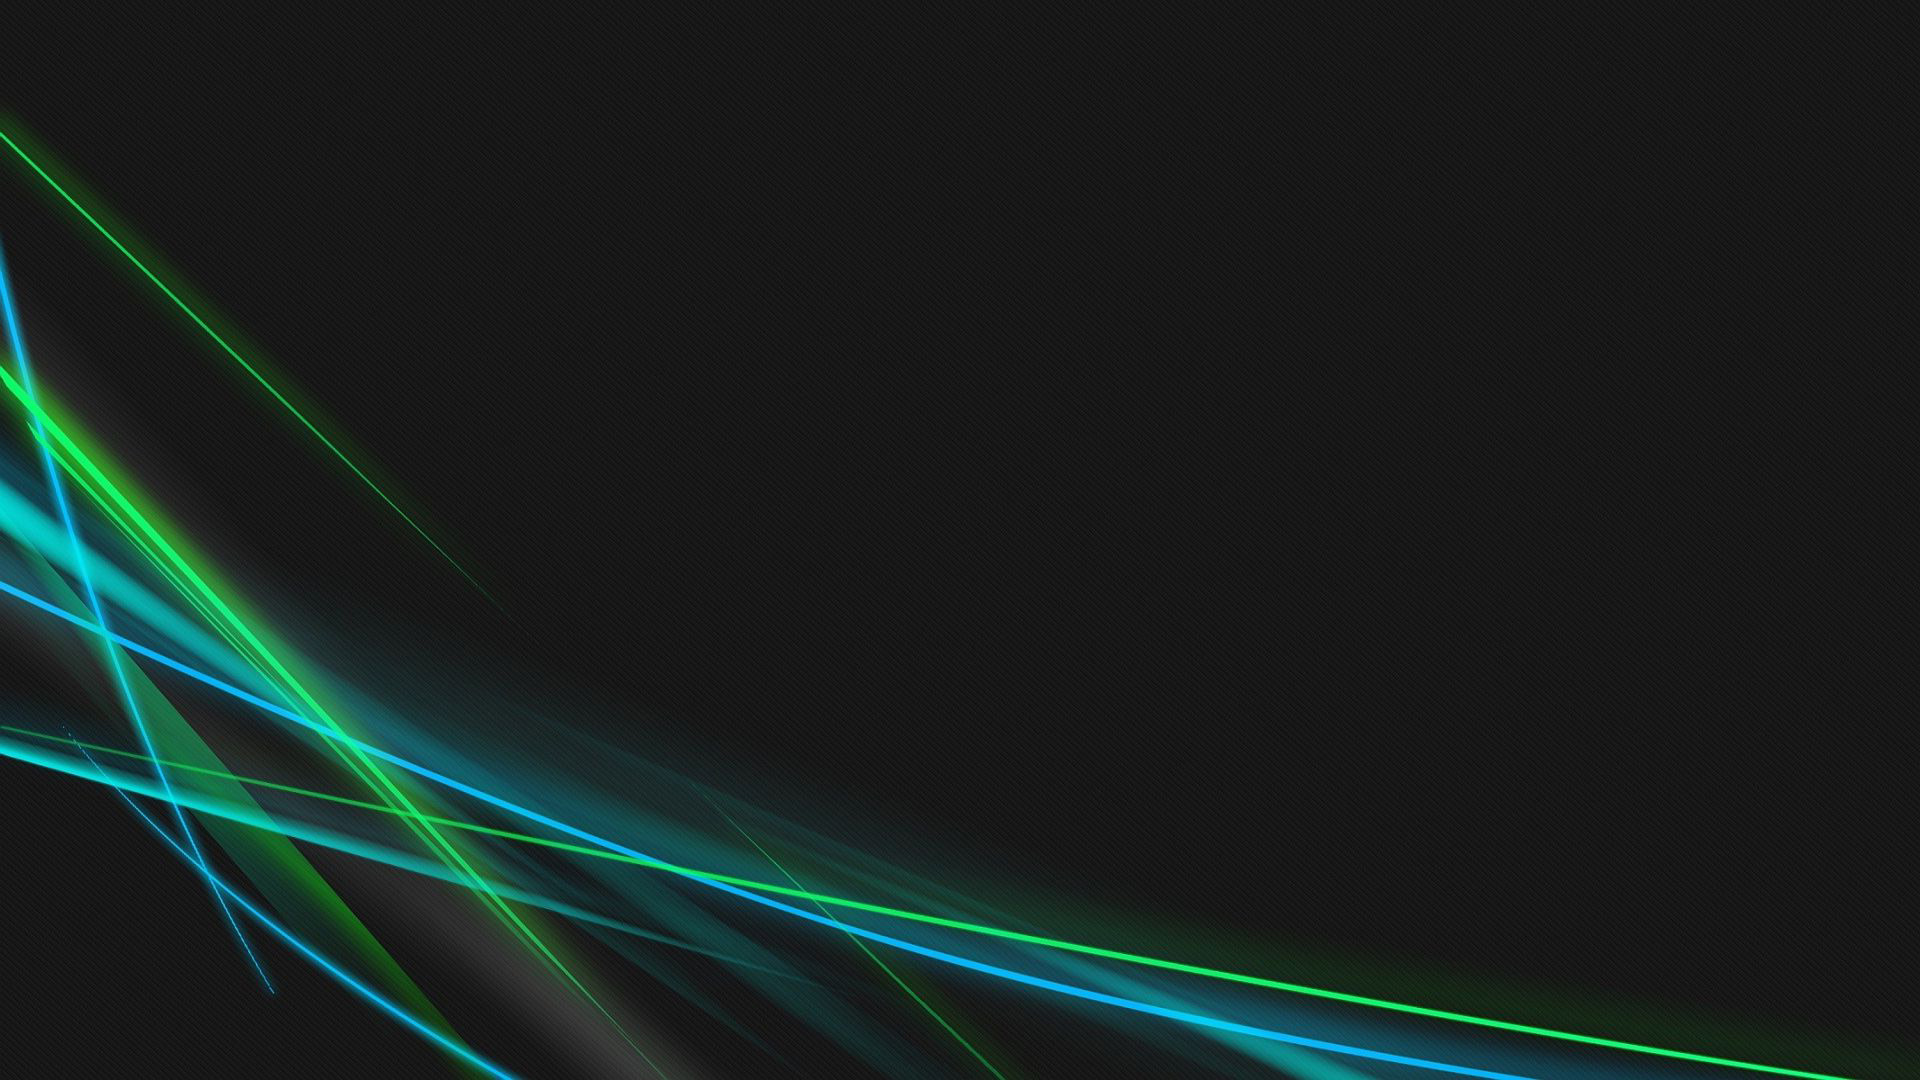 Free Download Blue And Green Neon Curves Wallpaper 6551 1920x1080 For Your Desktop Mobile Tablet Explore 45 Blue And Green Wallpapers Green And Purple Wallpaper Light Blue Green Wallpaper